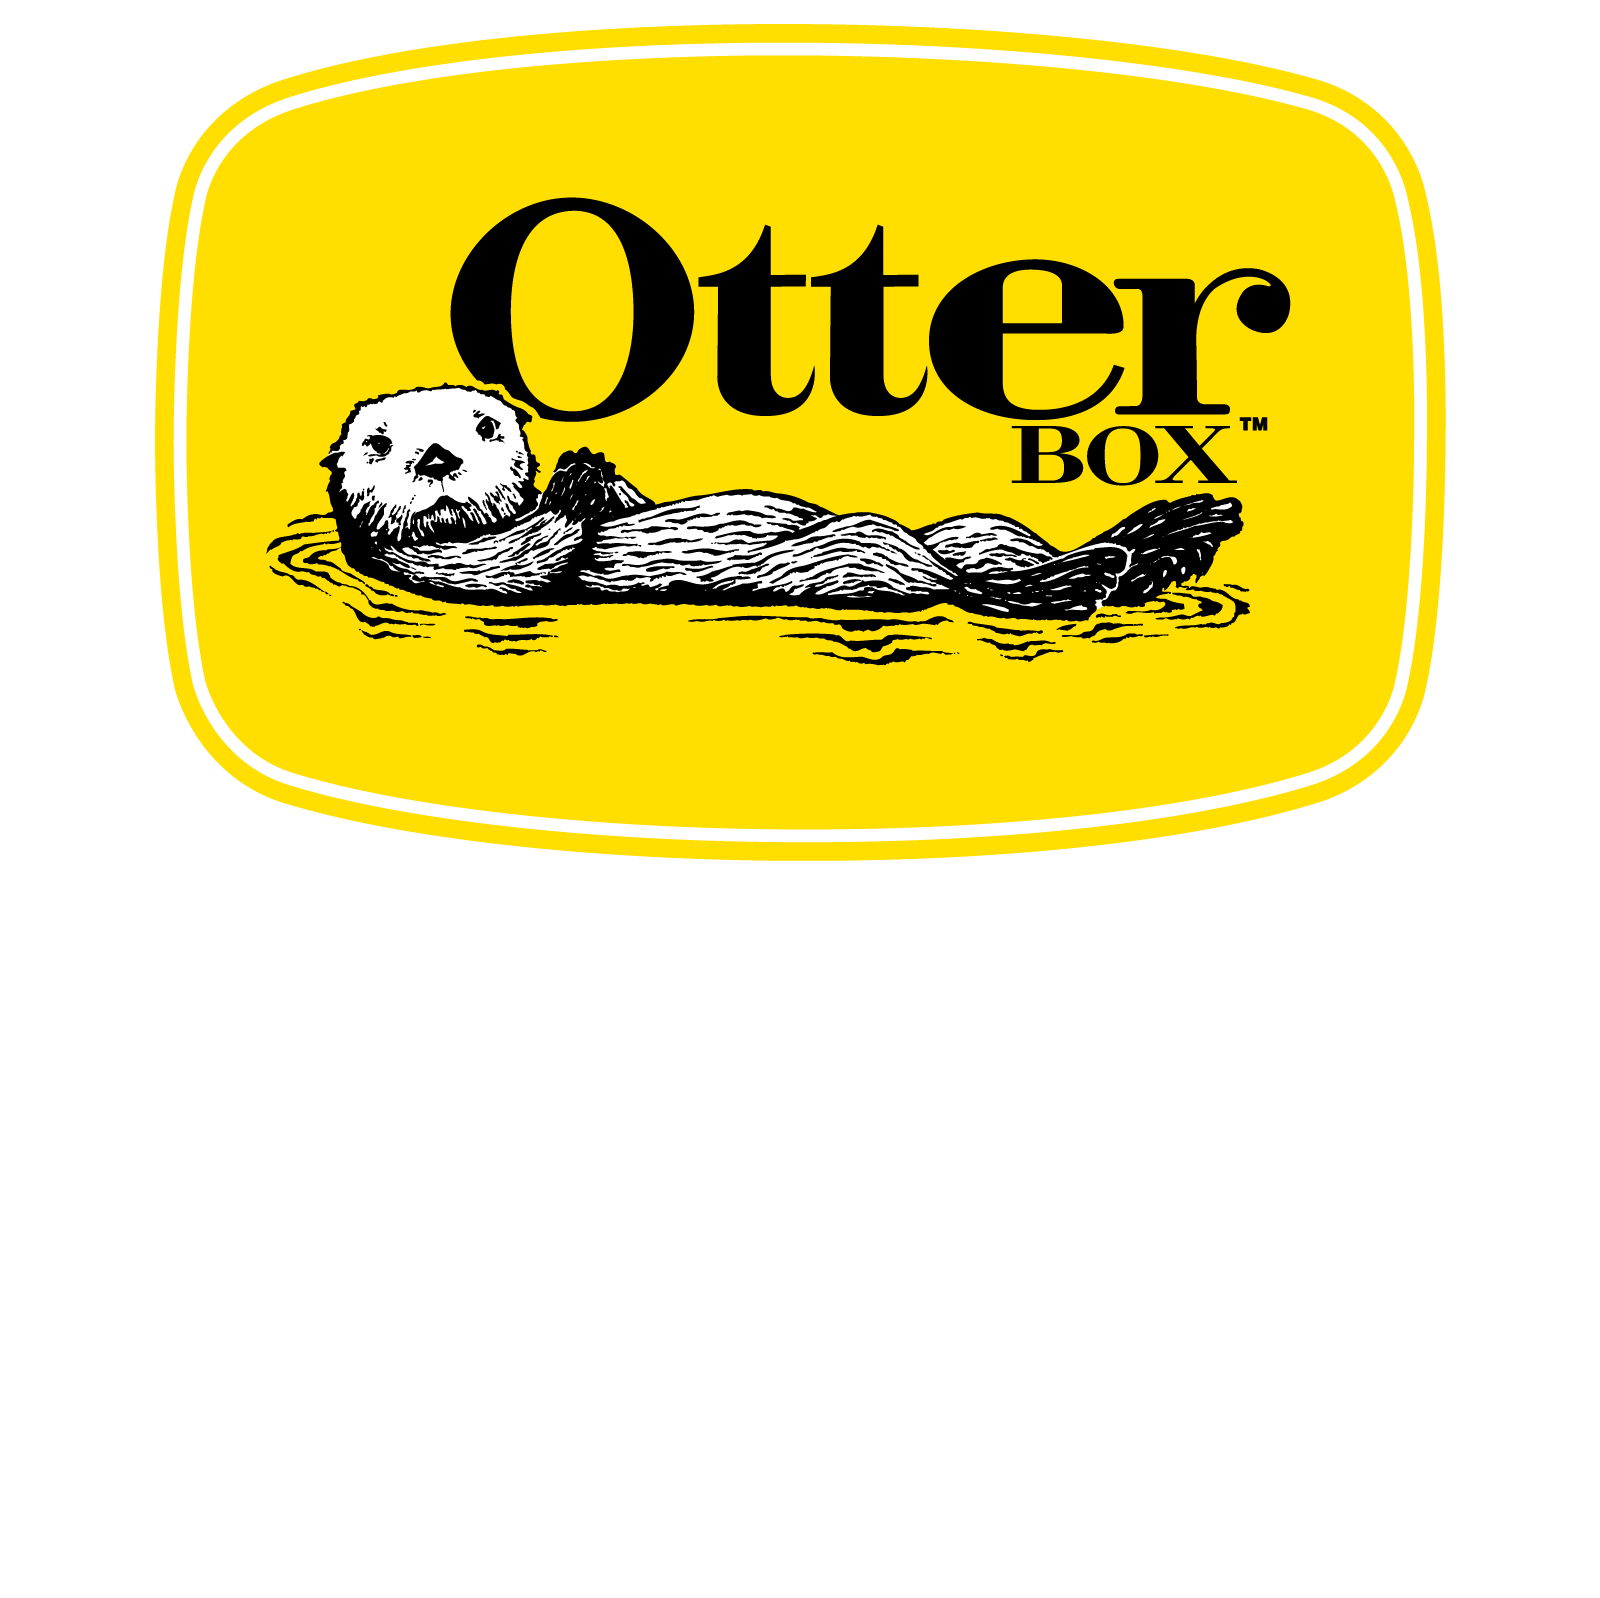 OtterBox Logo - Otterbox | Android Central